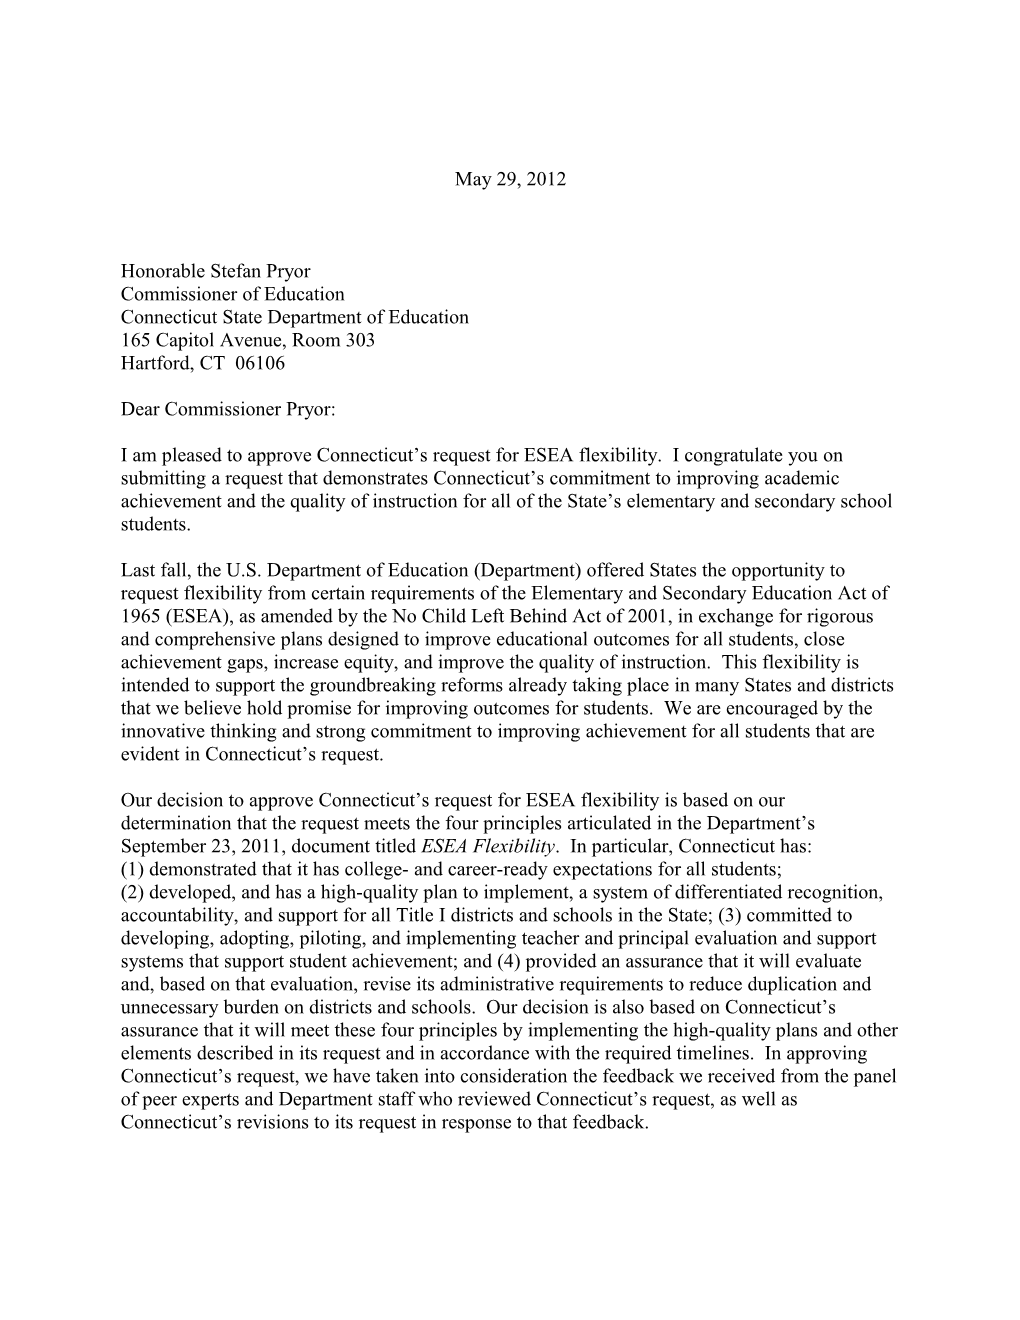 Connecticut: ESEA Flexibility Requests, Secretary's Approval Letter May 29, 2012 (MS Word)